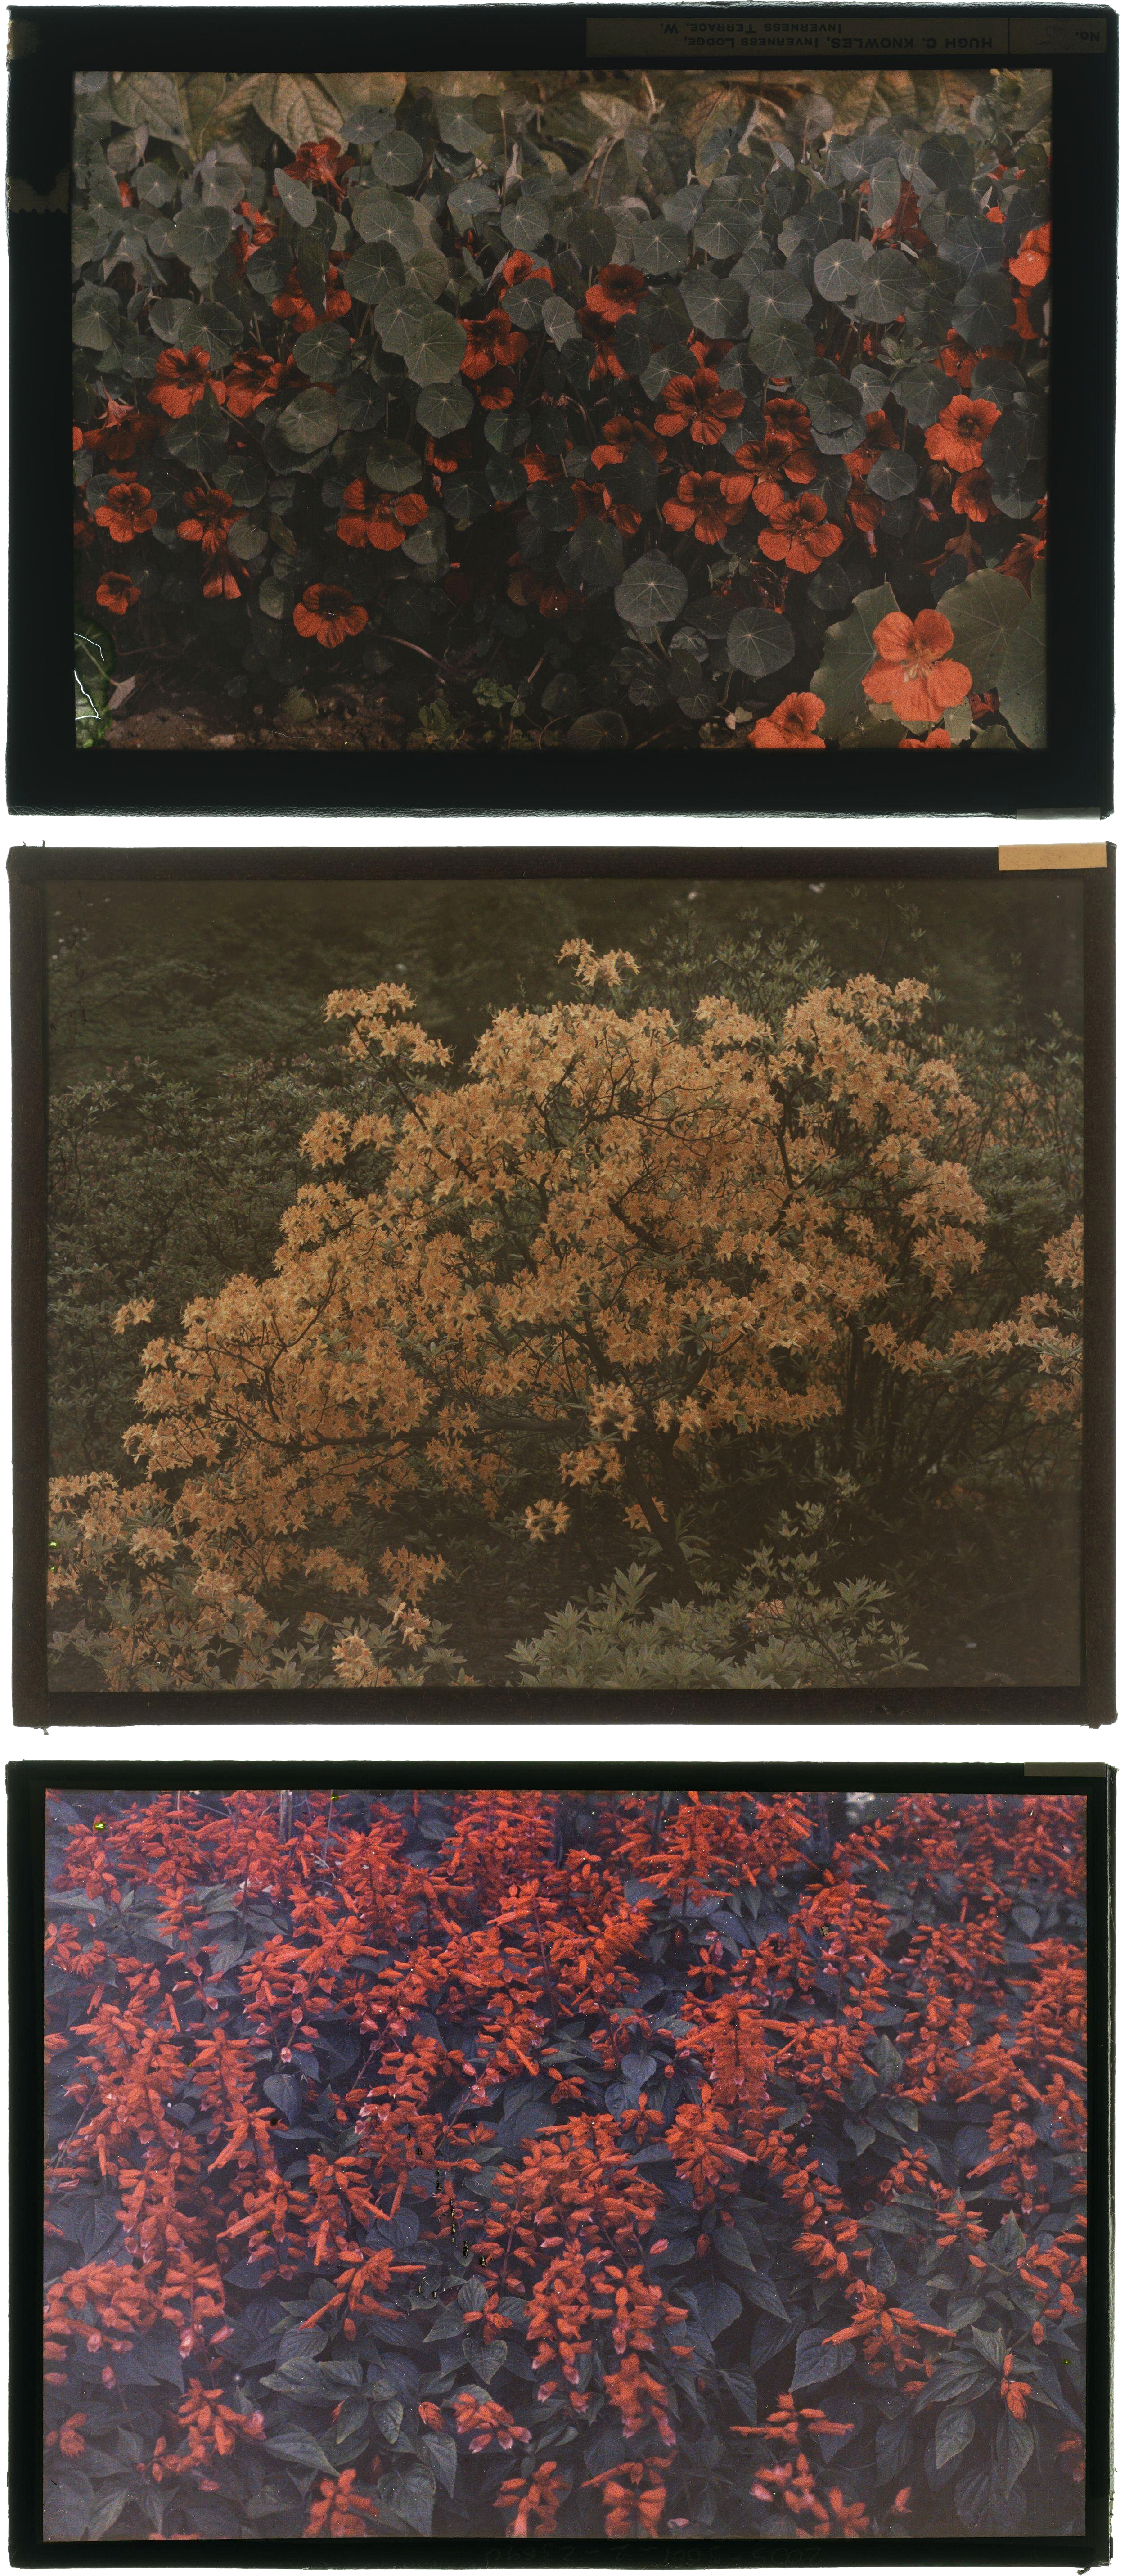 Hugh C. Knowles :: Nastertiums (top ) · Maple (middle) · Fuschias (bottom), England, ca. 1910. Autochromes. | src The Royal Photographic Society Collection at the V&A Museum